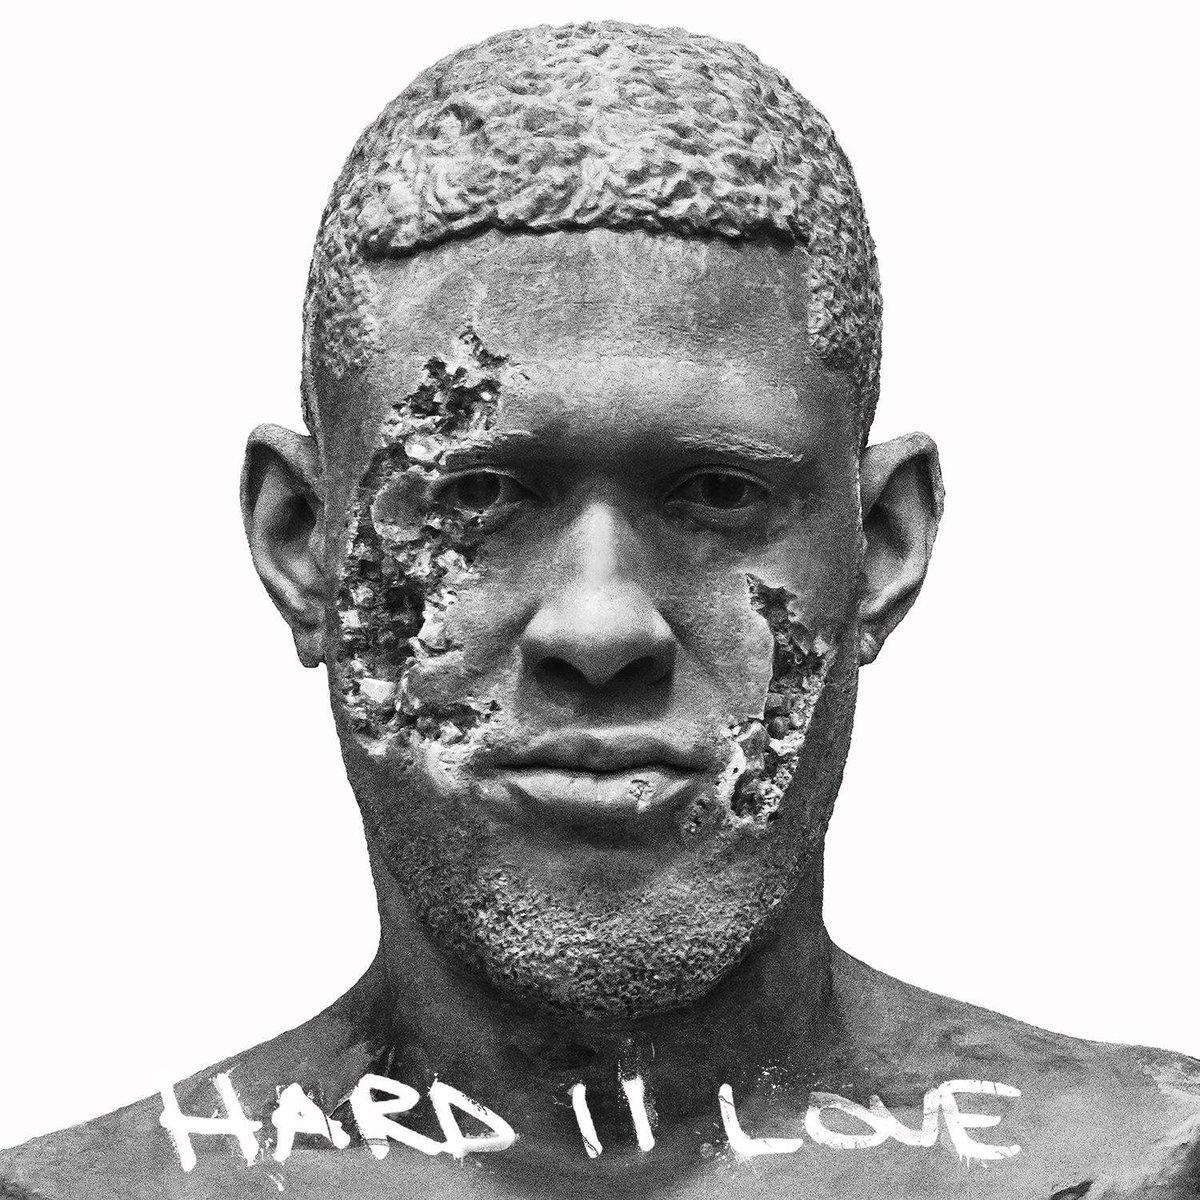 For you, my fans. #HardIILove is now on @TIDALHiFi. Listen now ????????  https://t.co/rDuzOtM3P3 https://t.co/Ua5VoDHcL9